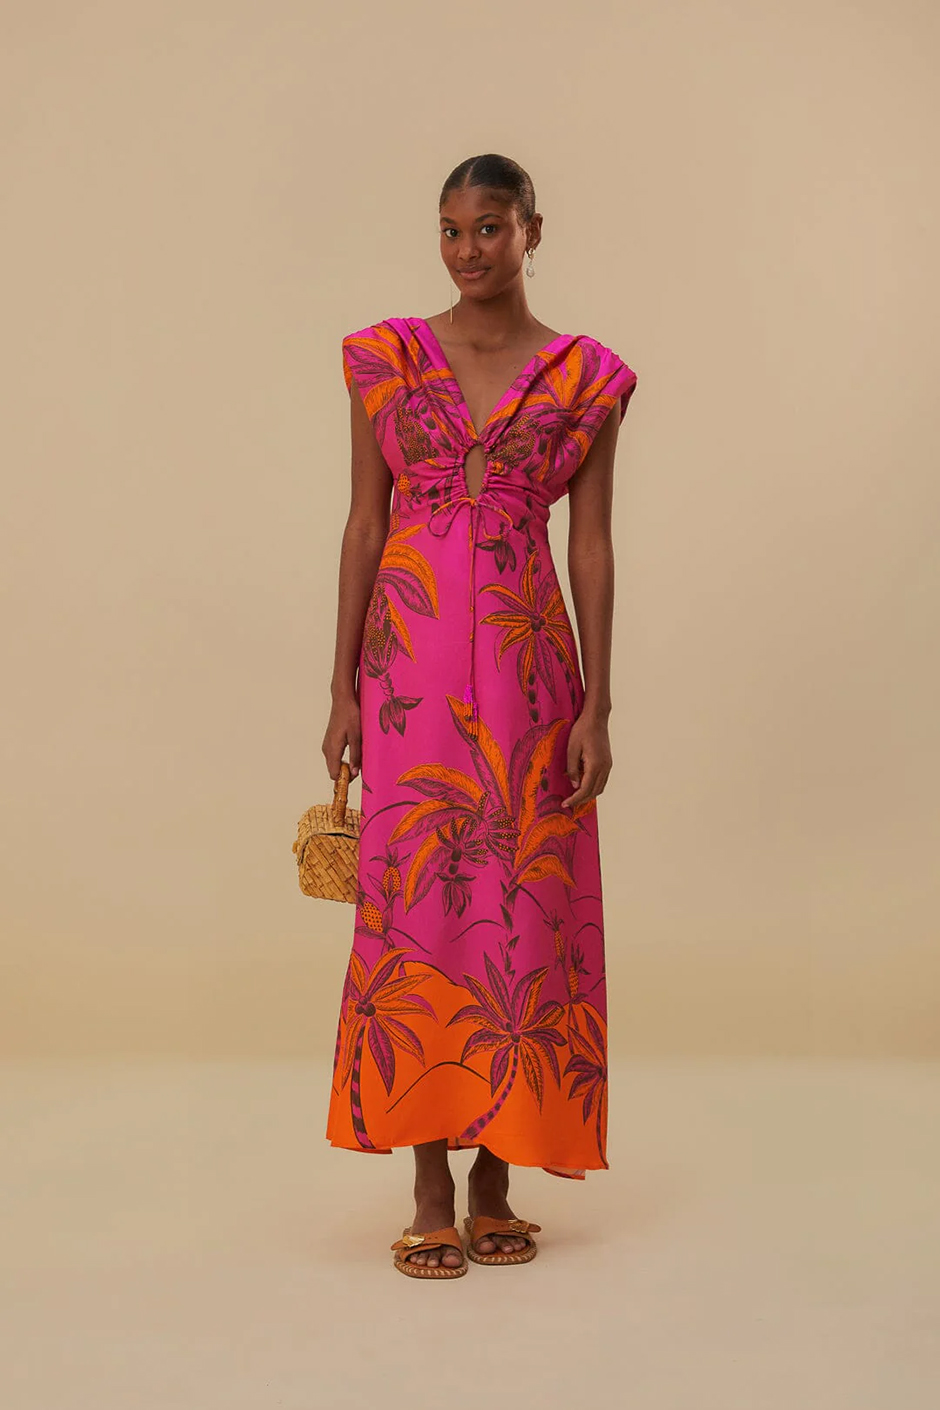 Lightweight pink and orange maxi dress with palm pattern from Farm Rio for summer wedding guest dress idea 